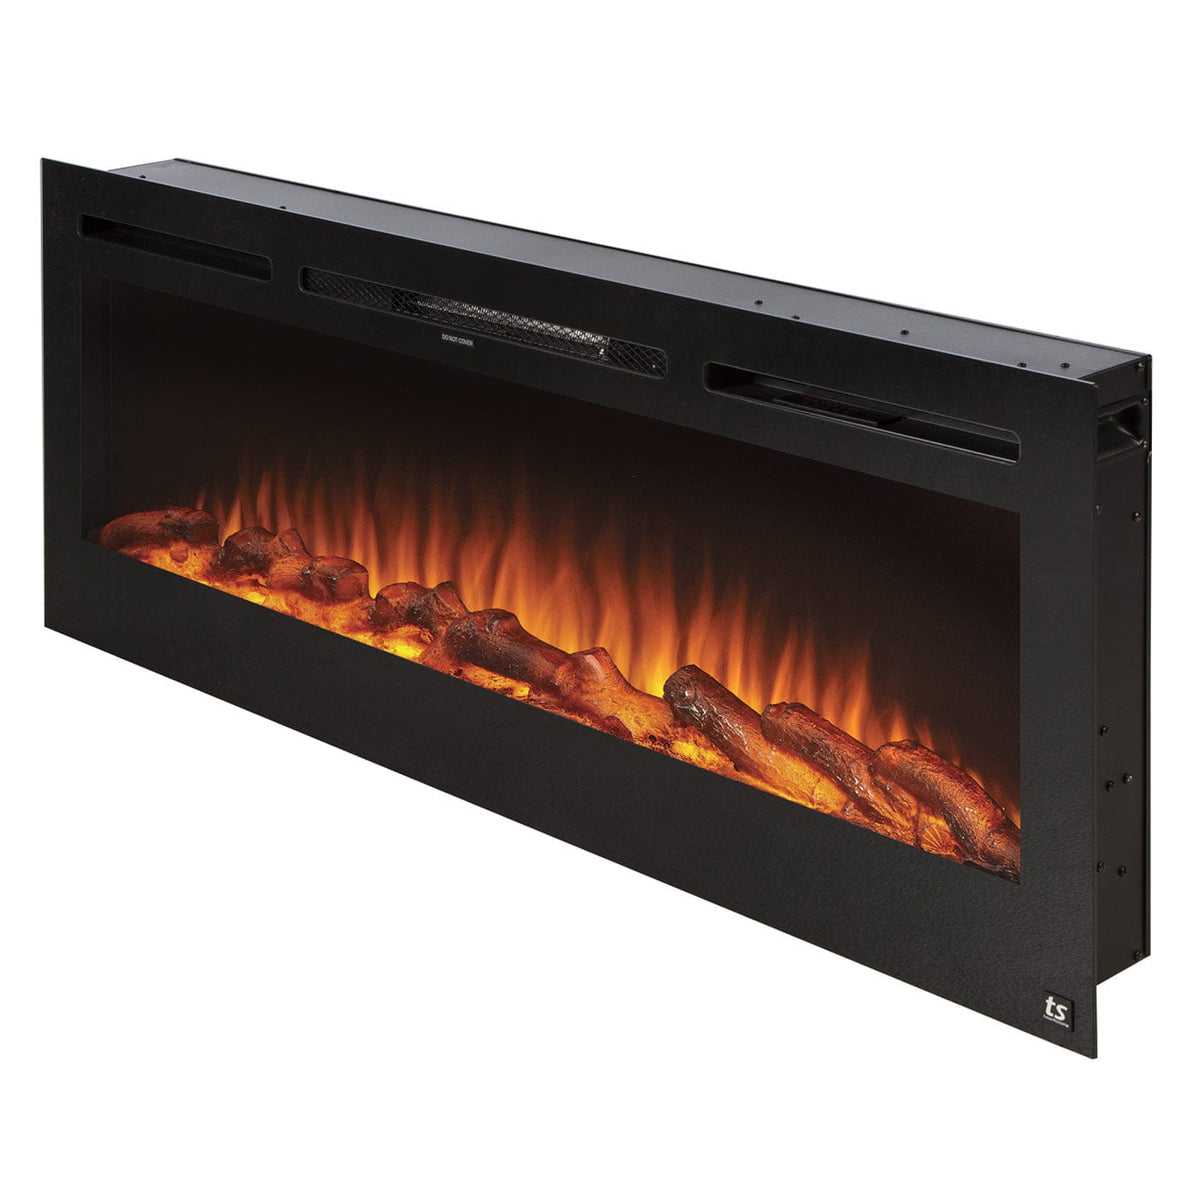 Touchstone Sideline 50 Inch Recessed Smart Electric Fireplace 80004